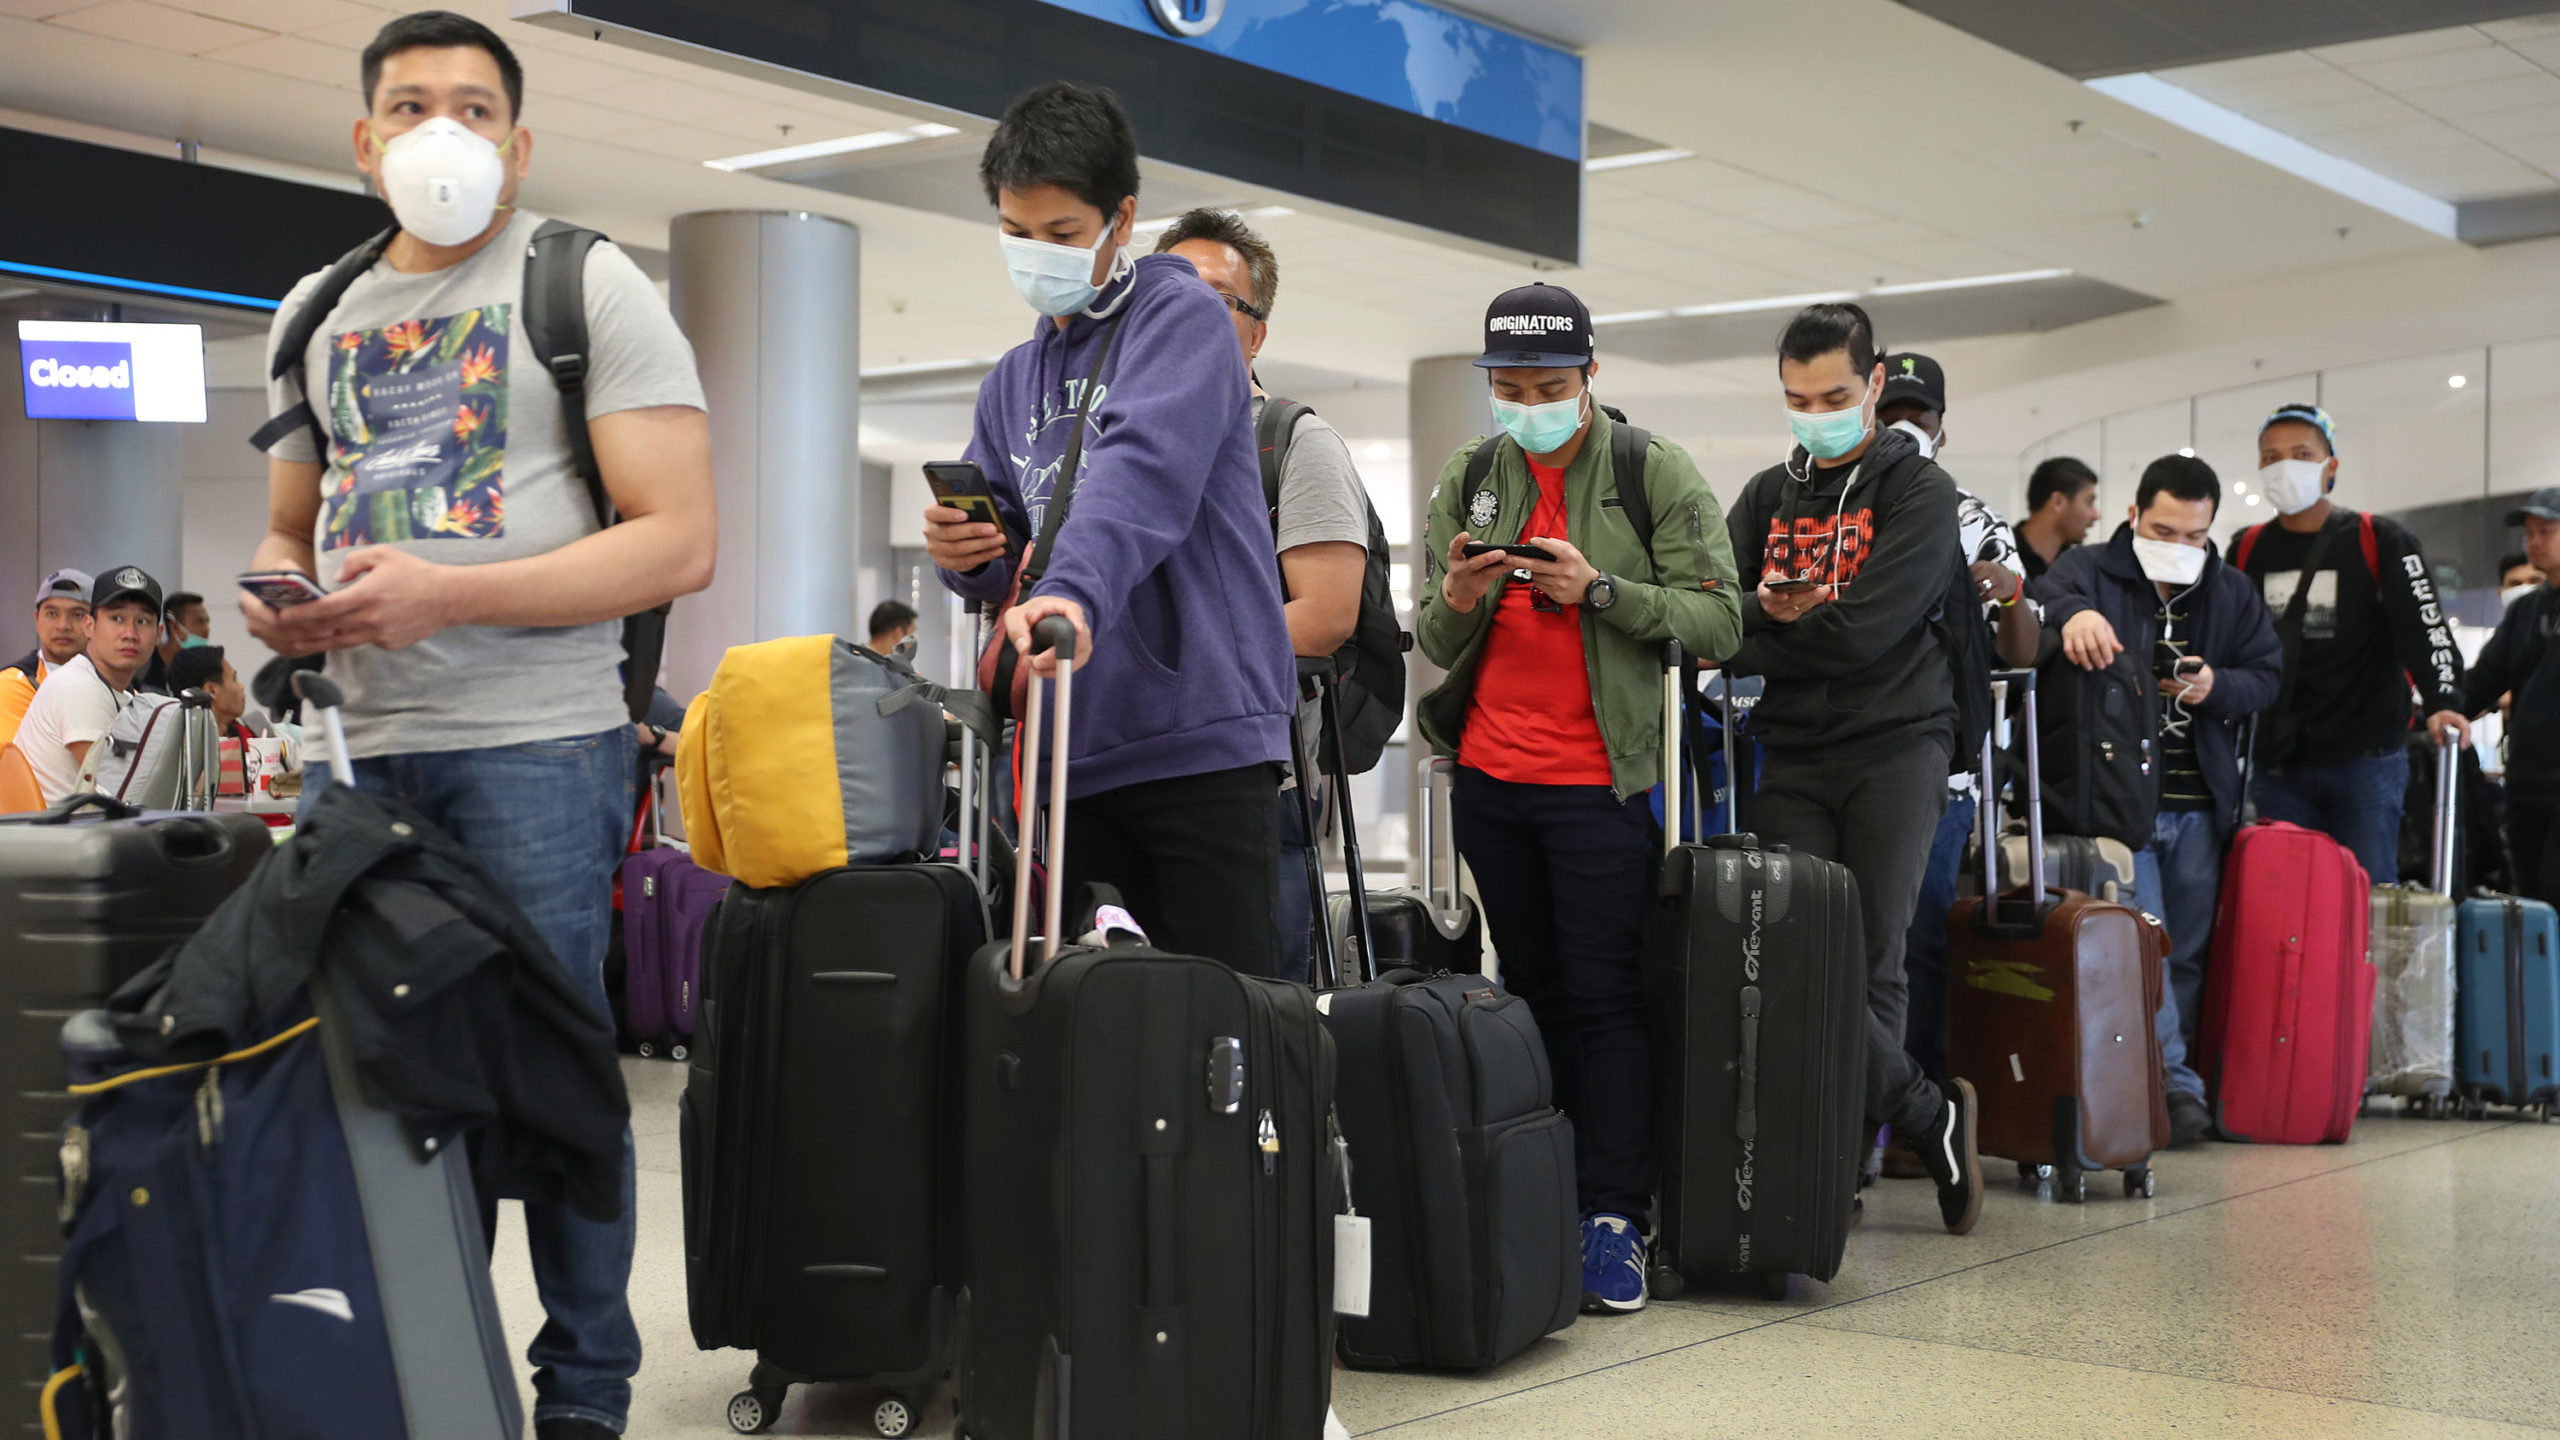 FILE: People wait to check-in at the Qatar Airways counter amid coronavirus fears at Miami Internat...